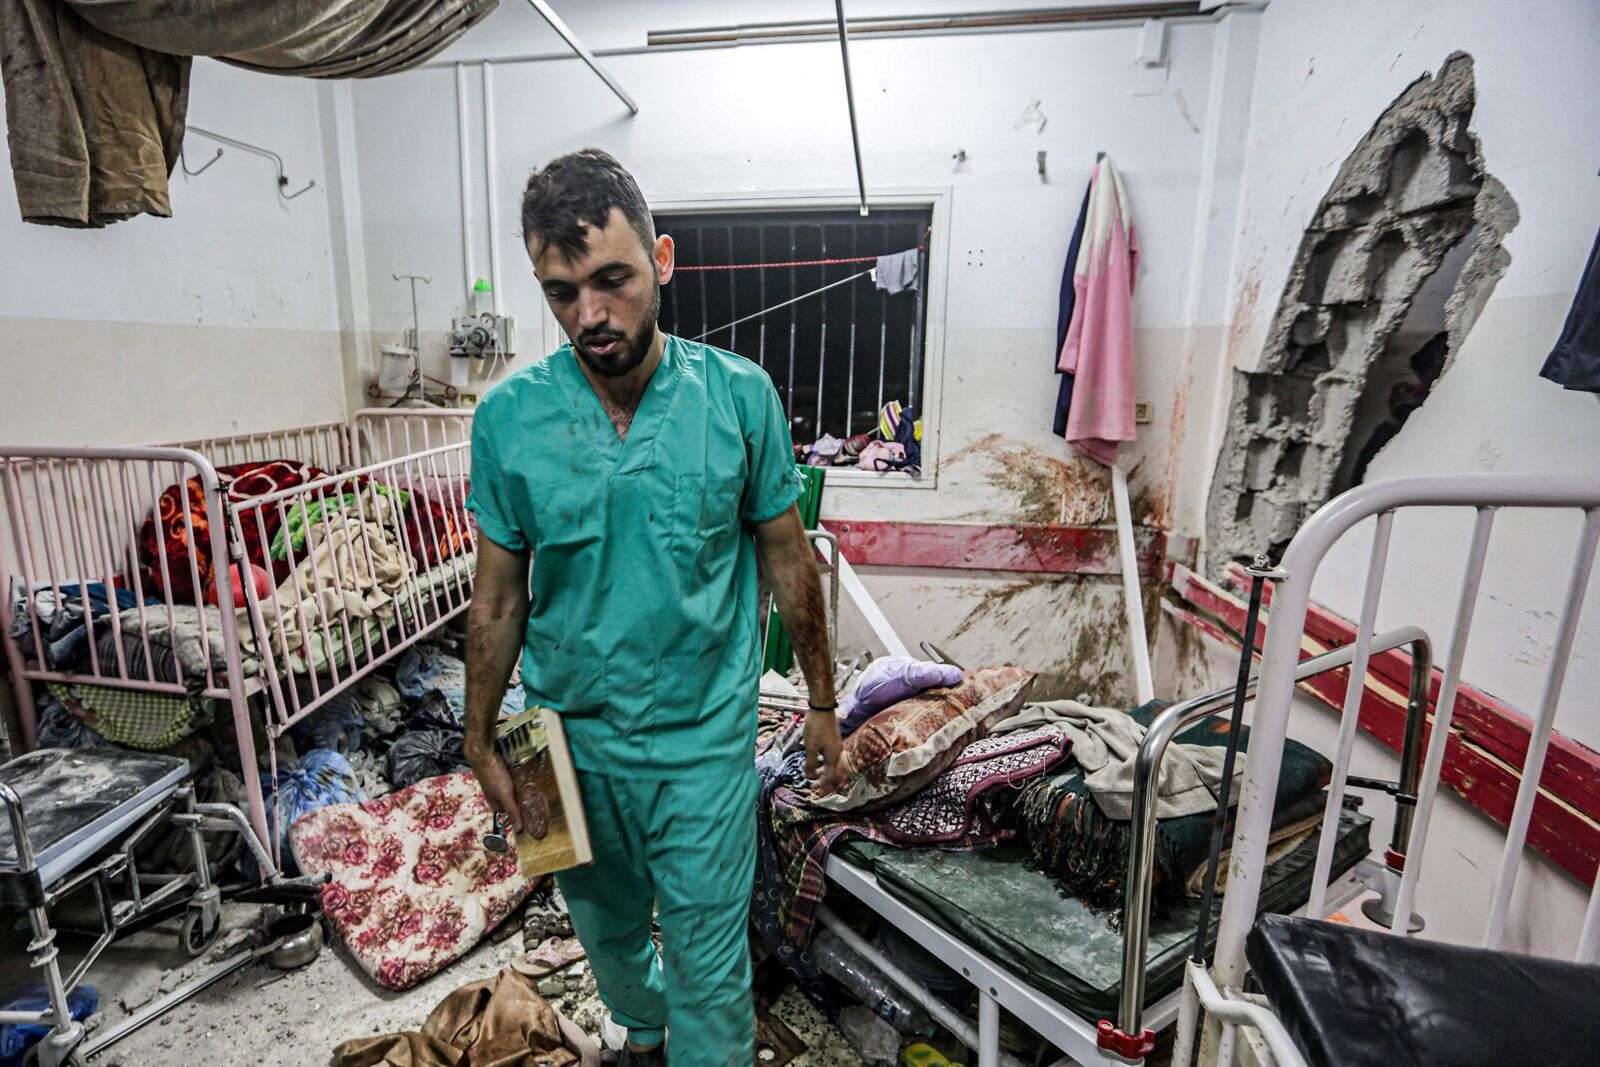 gaza war: 100 people killed in israeli strikes overnight as fears grow for patients in raided hospital